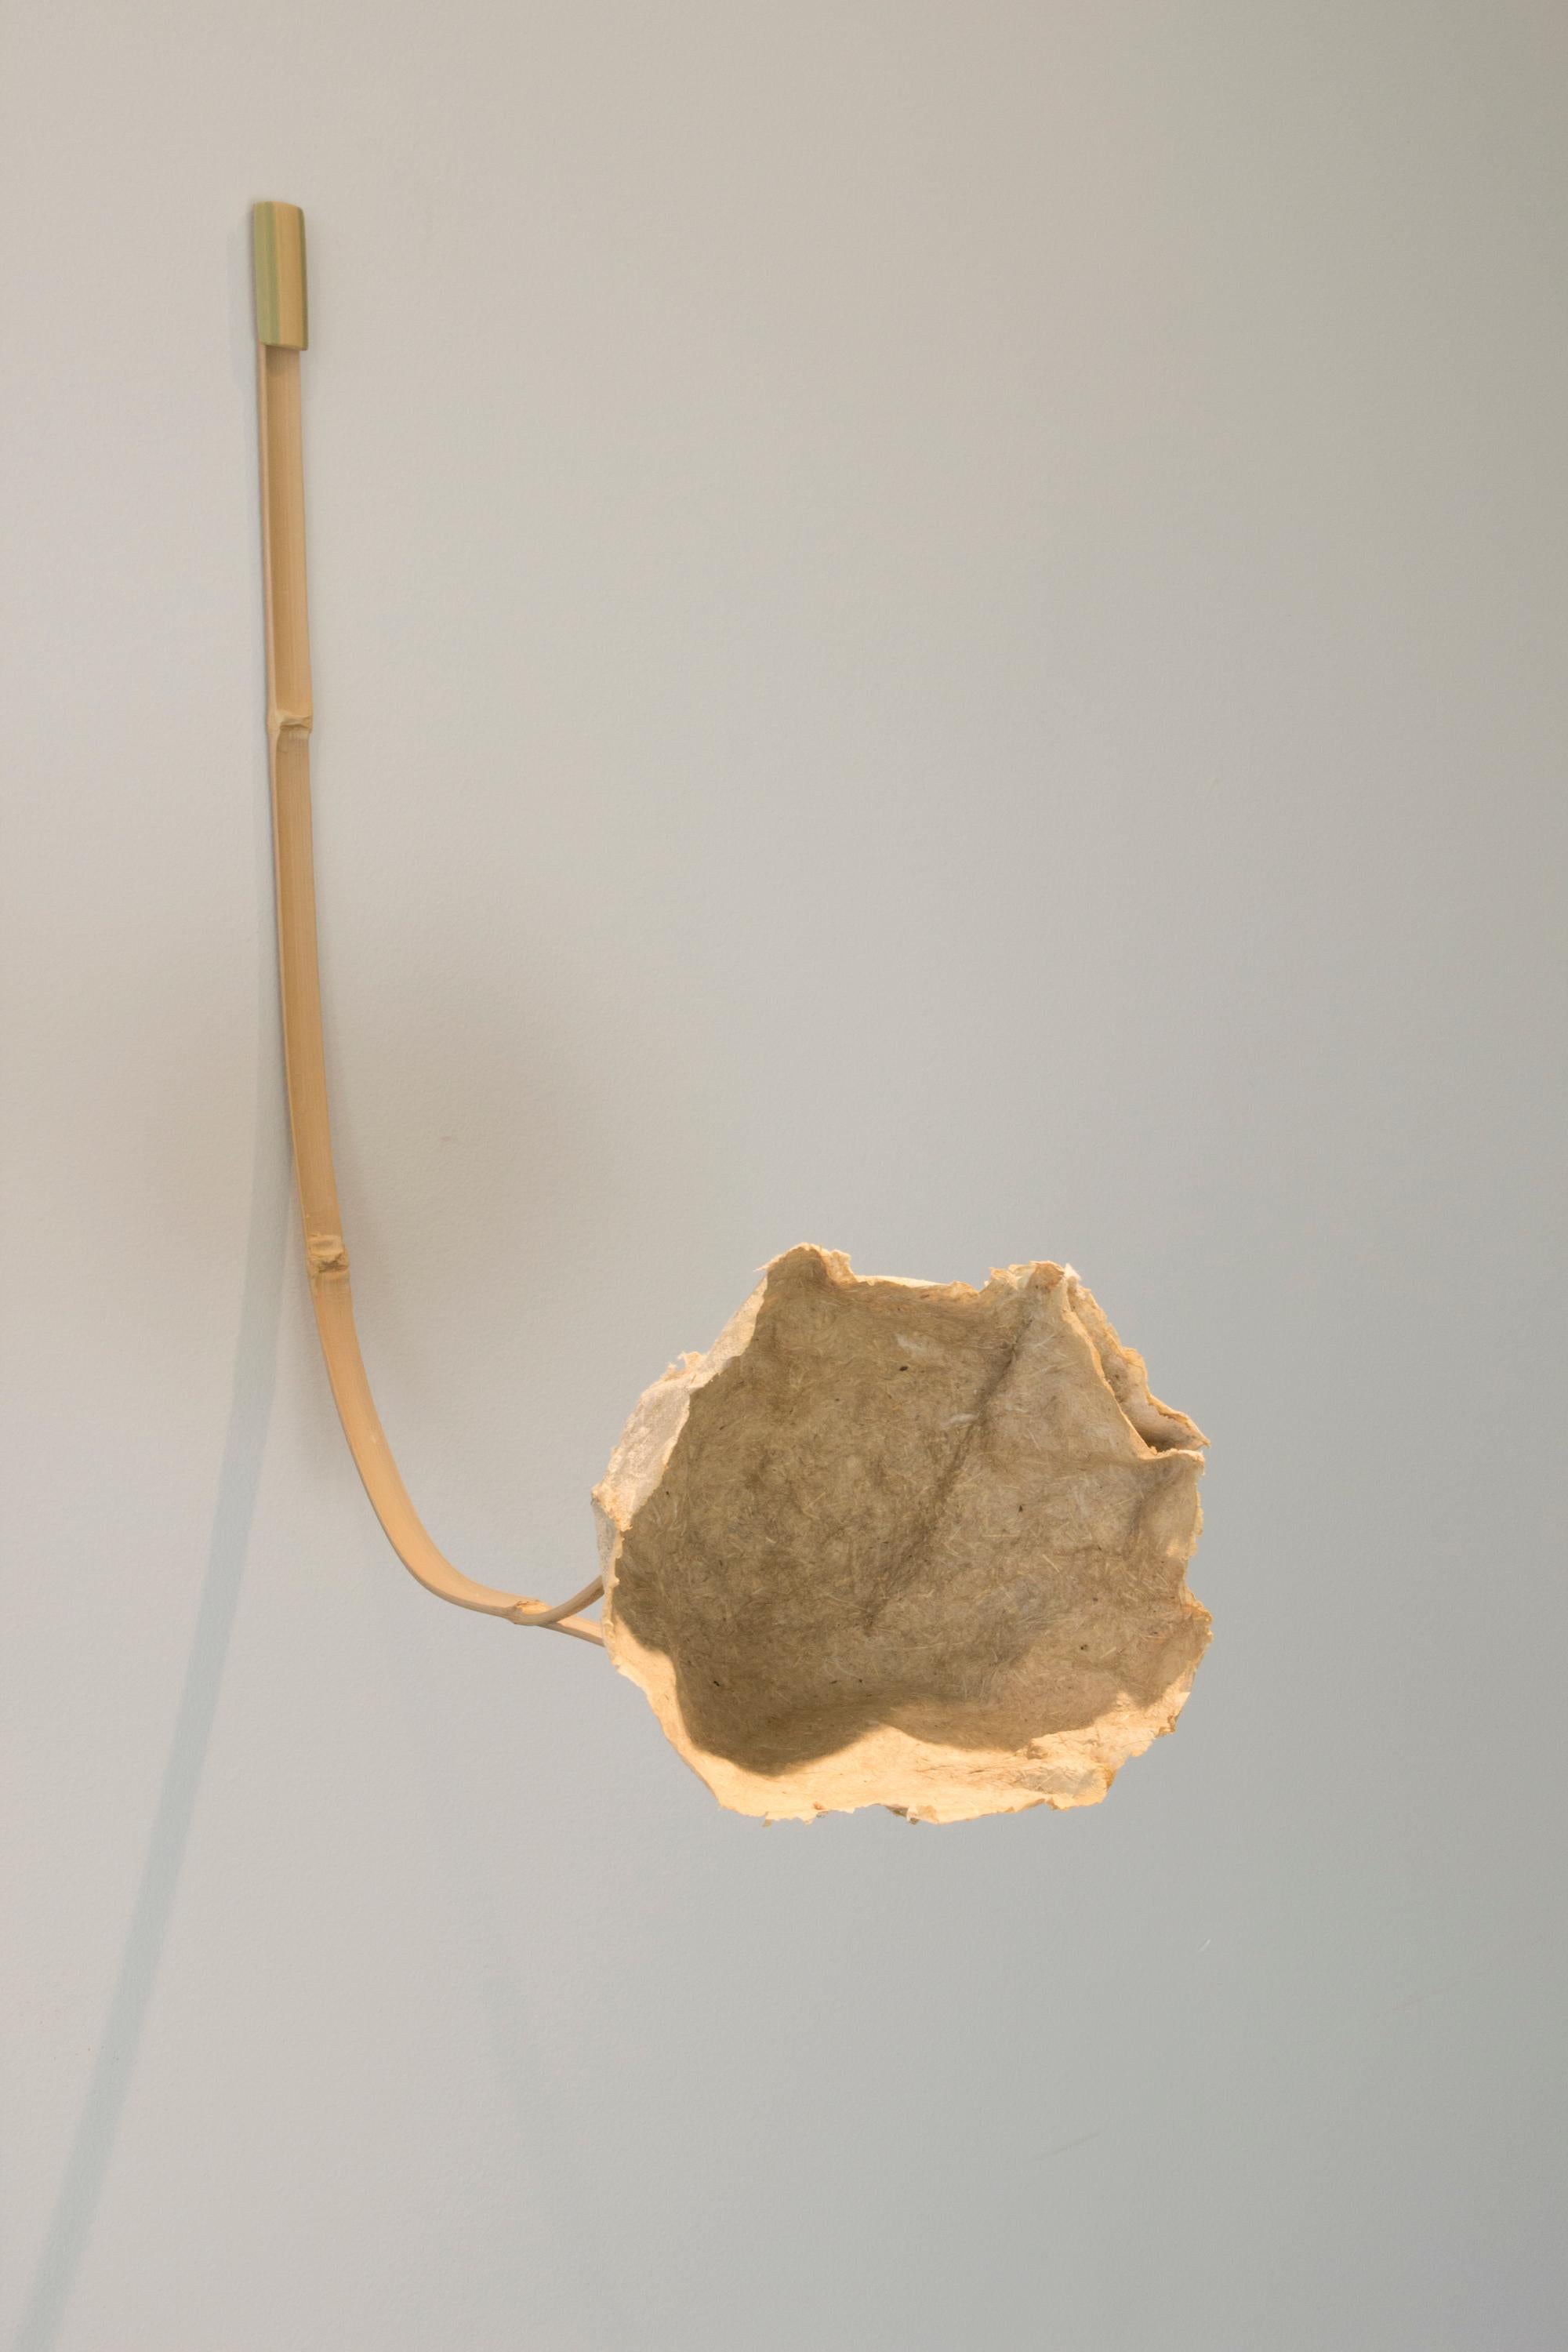 Michele Brody, Re-Blooms, Installation, Handcast Paper, Bamboo, 8'h x 5'w x 3'd For Sale 1